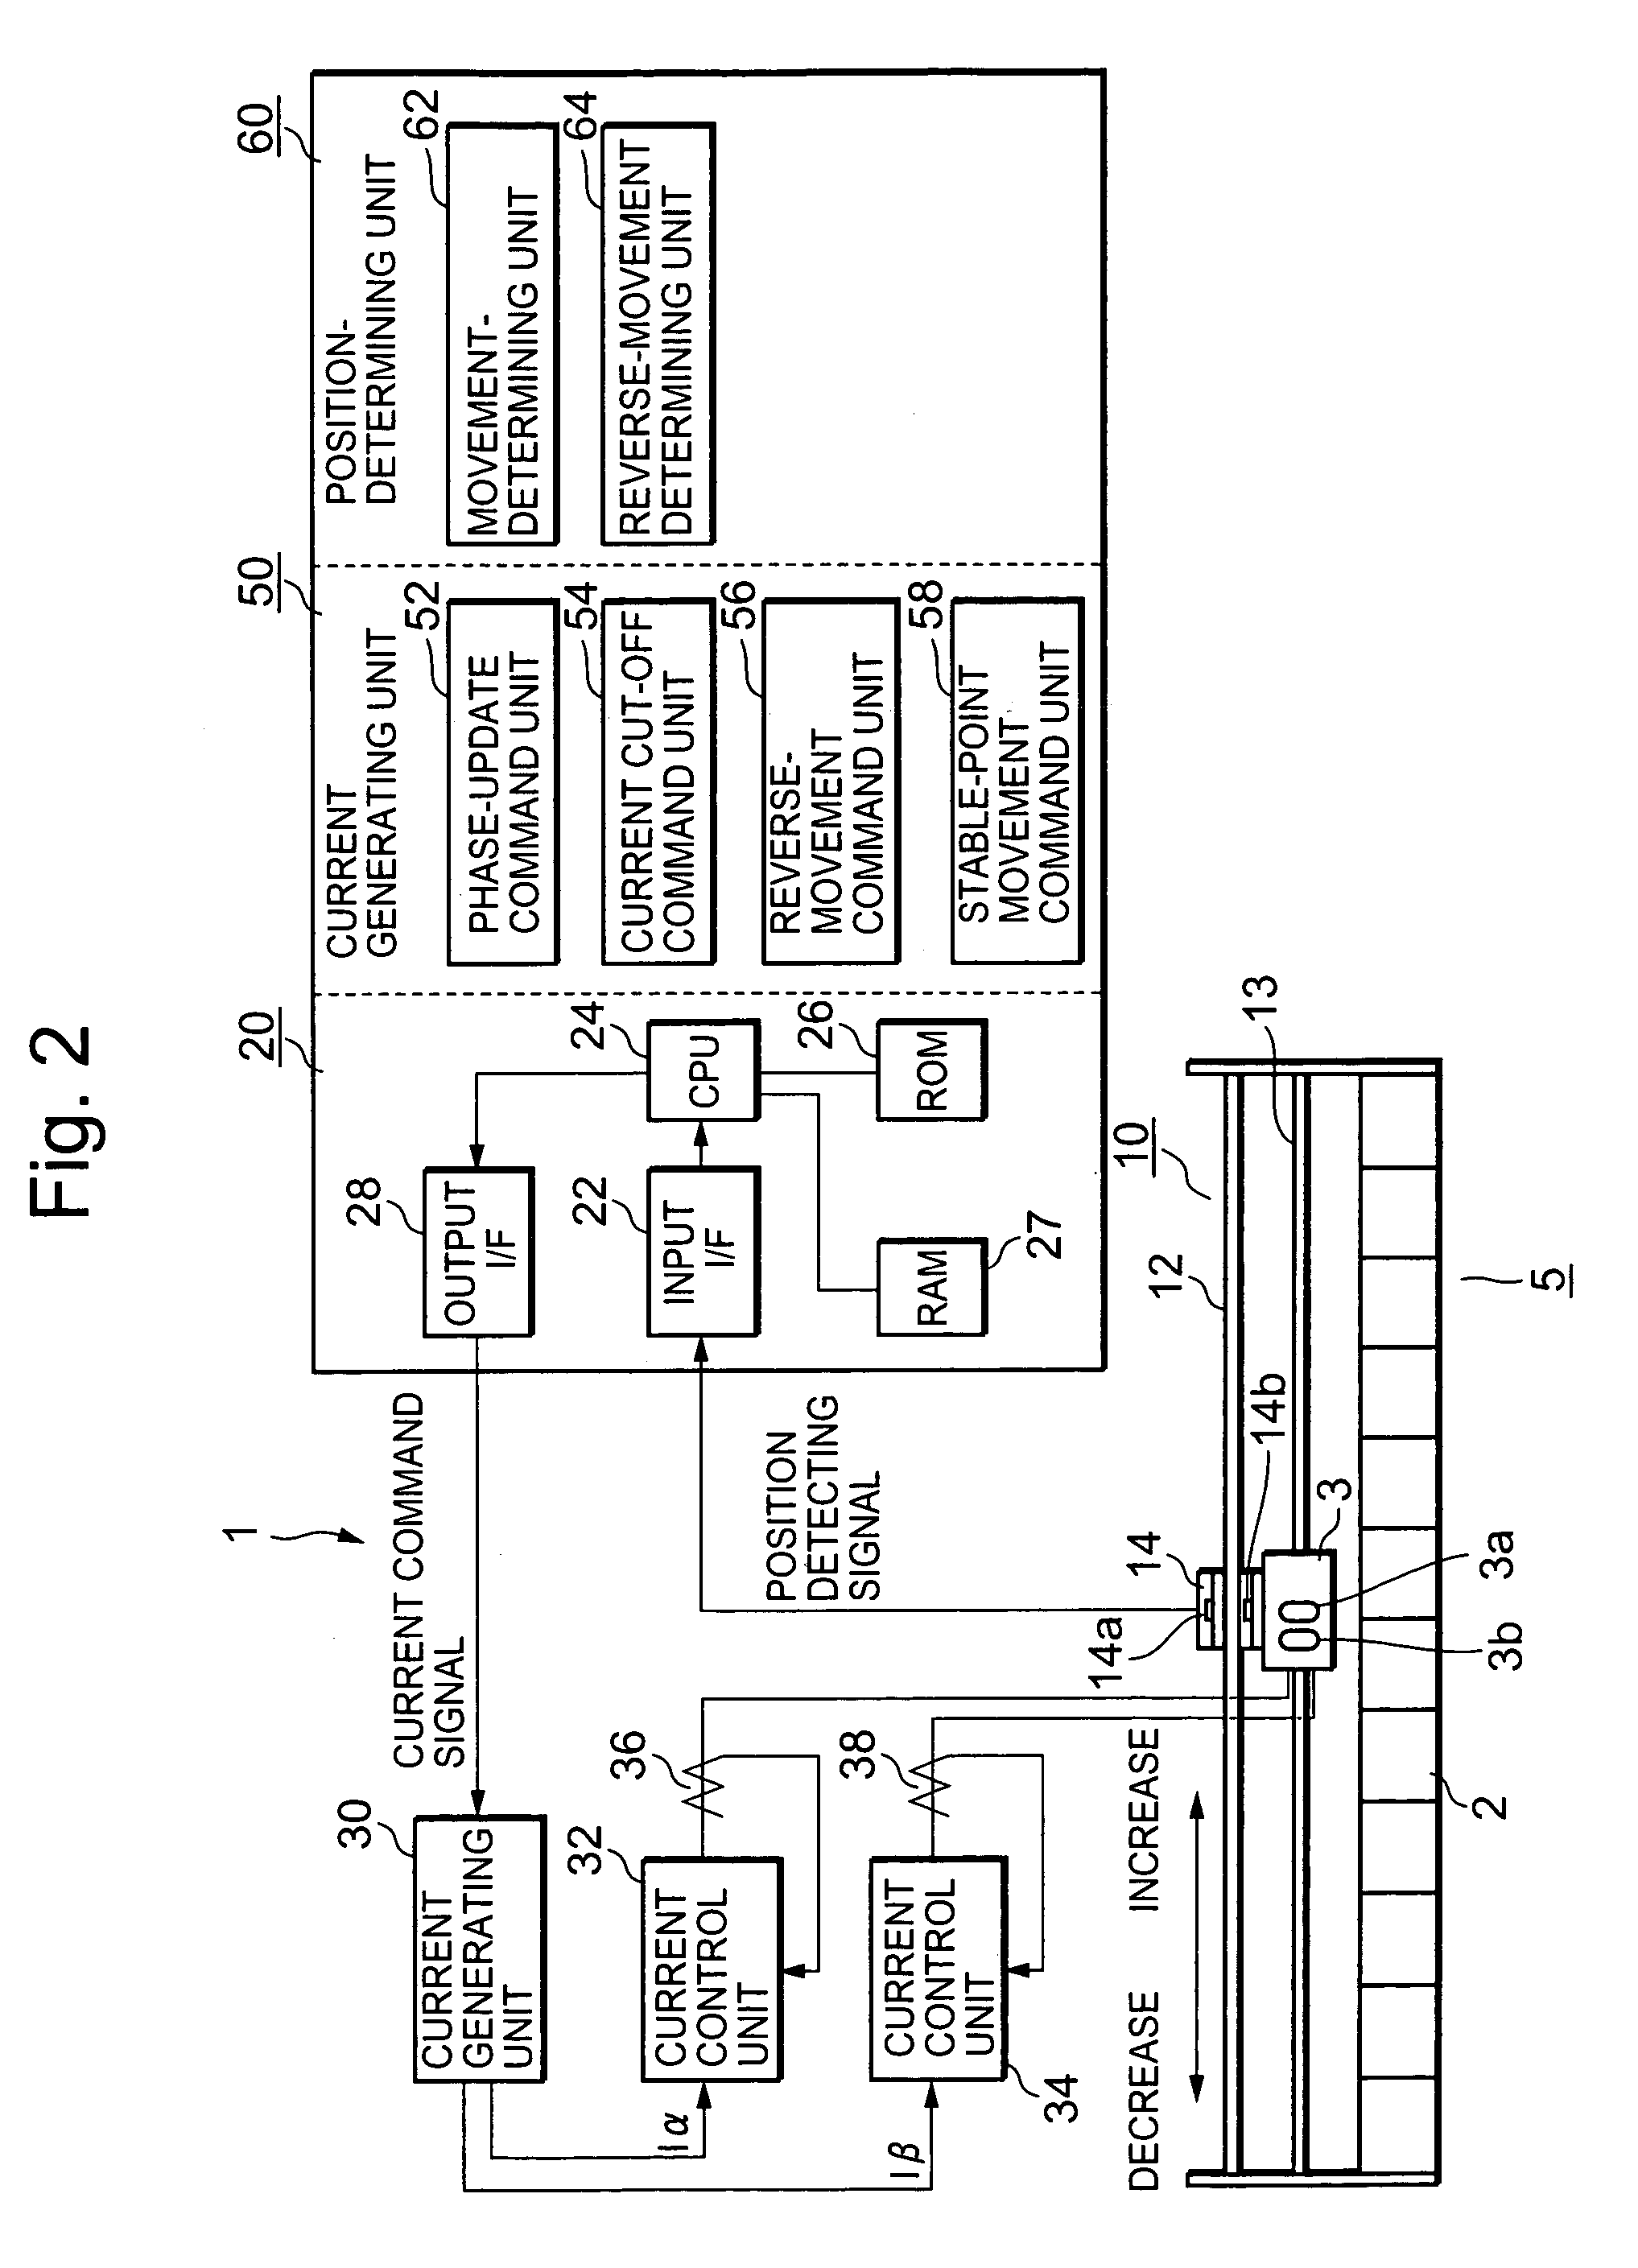 Magnetic-pole detecting system for synchronous AC motor and magnetic-pole detecting method therefor